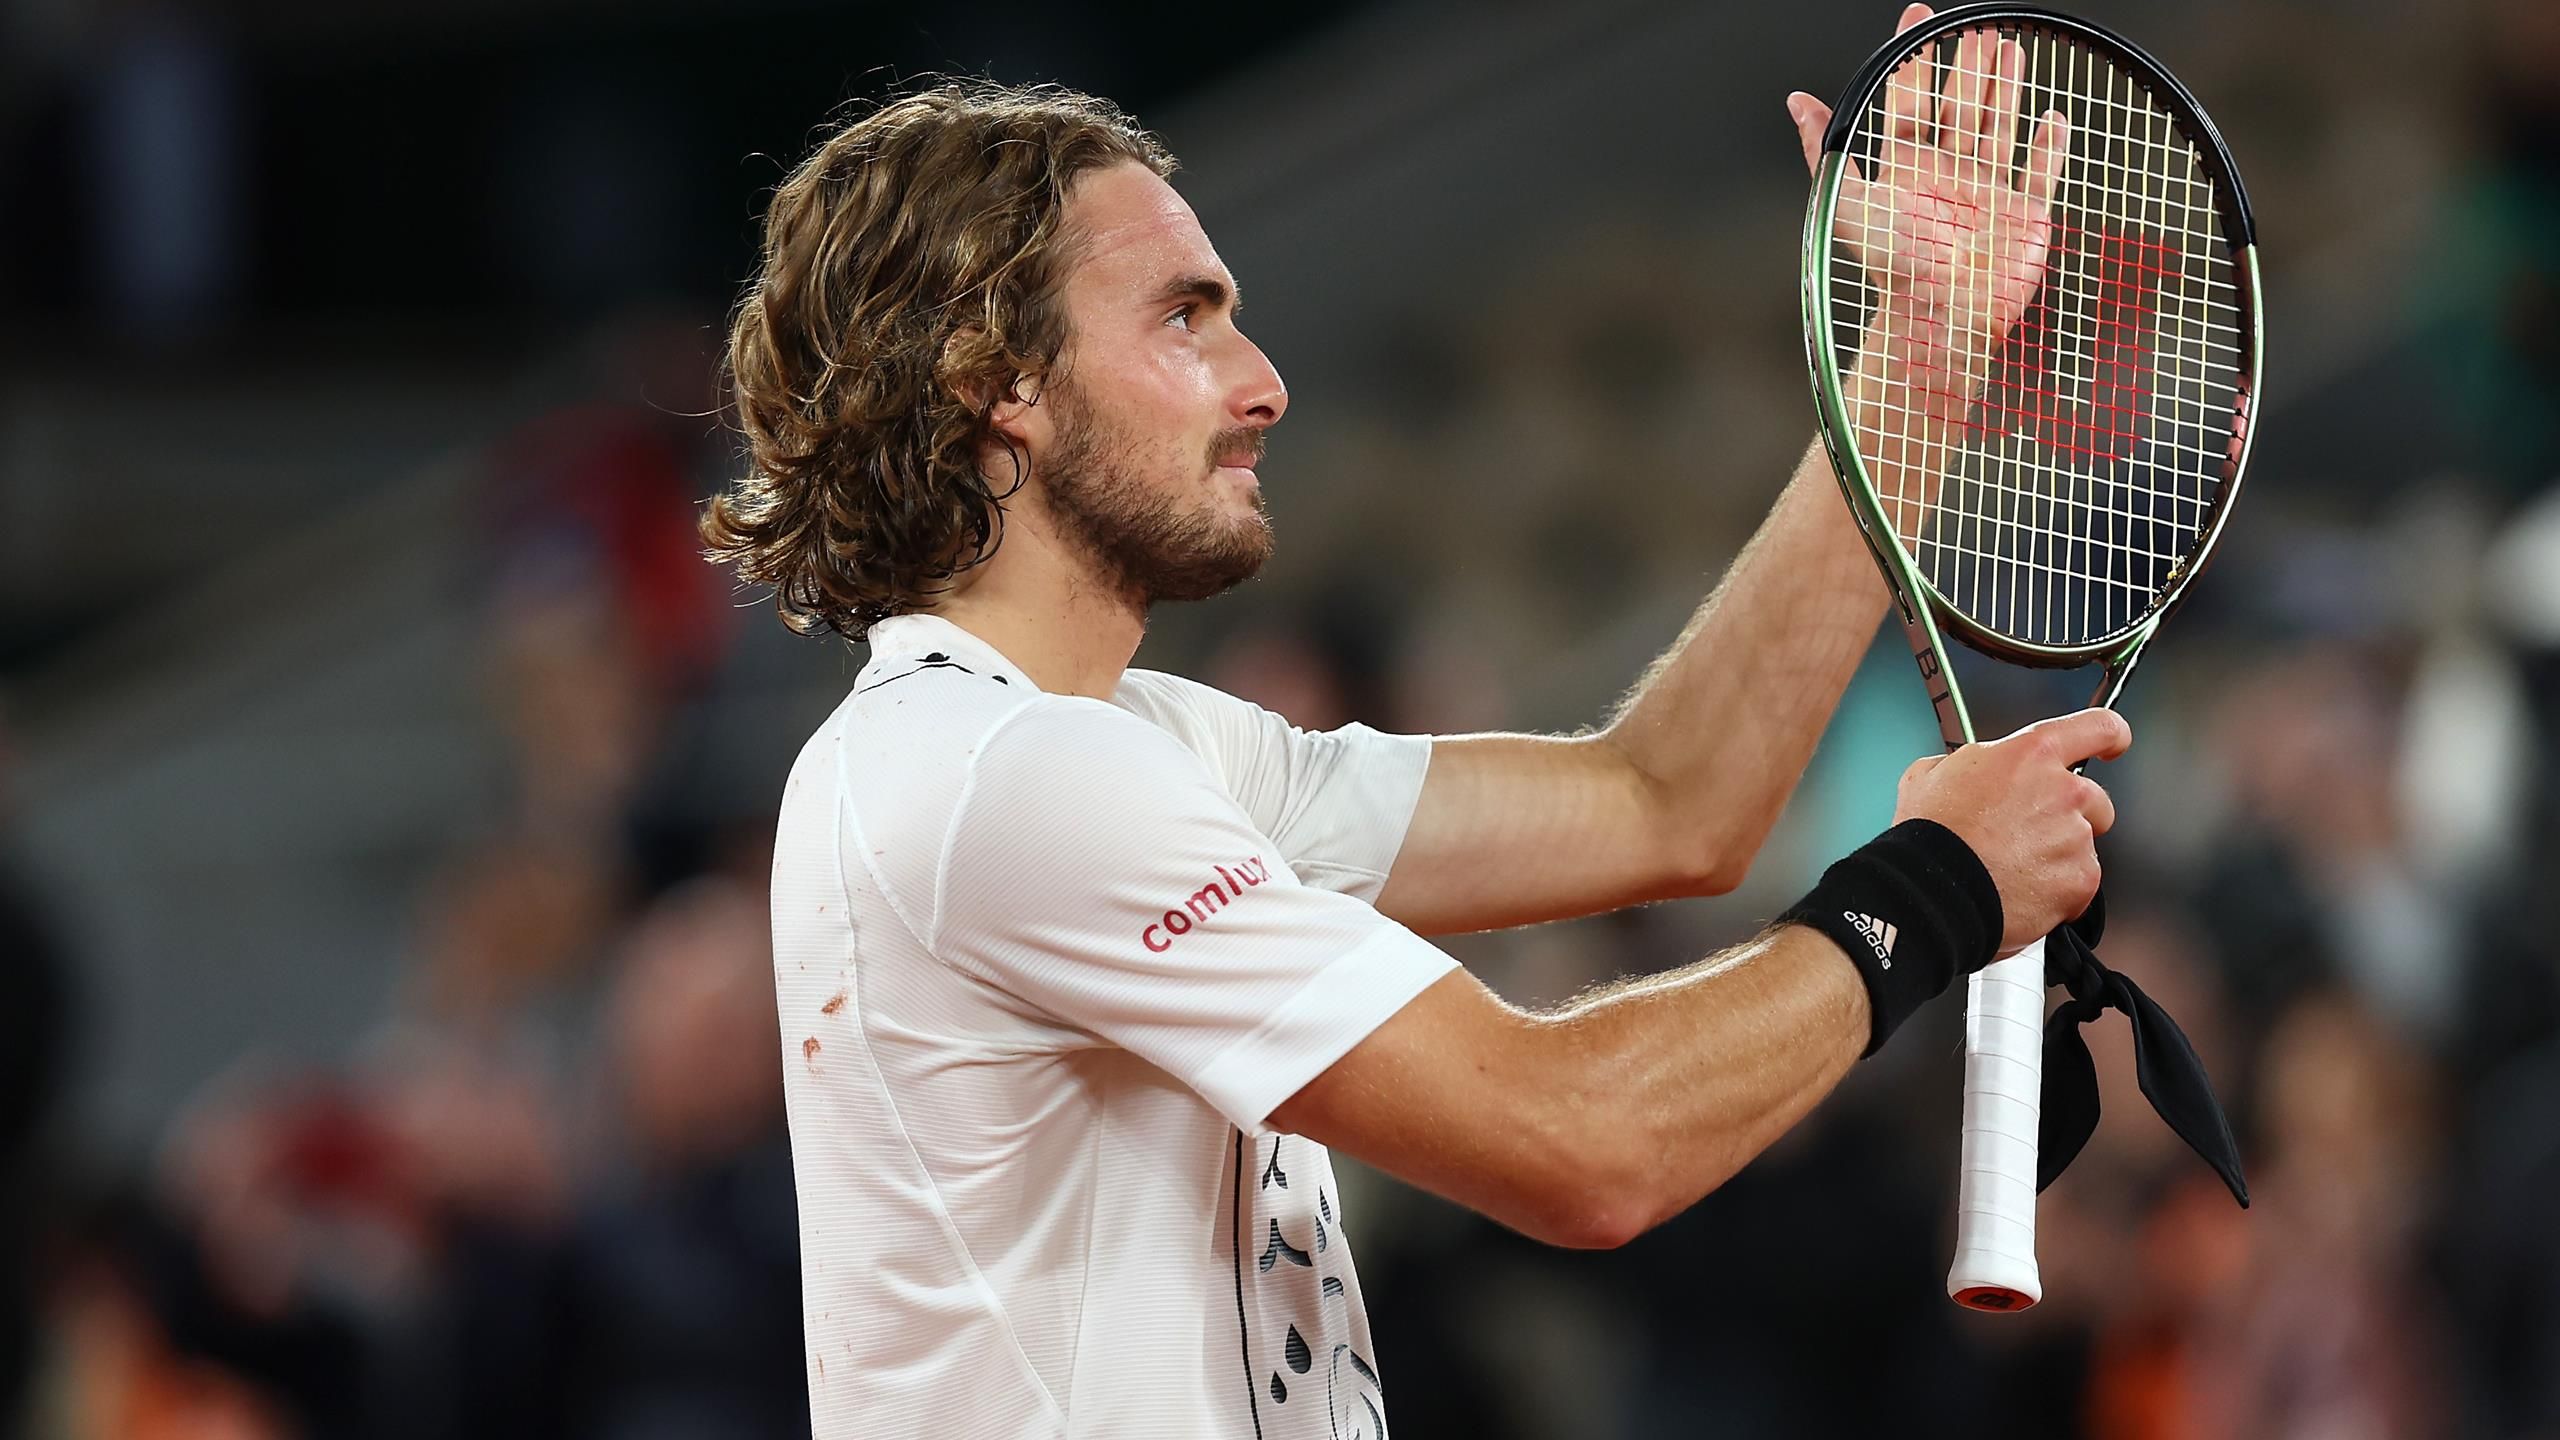 Stefanos Tsitsipas says change of attitude sparked superb comeback against Lorenzo Musetti at French Open